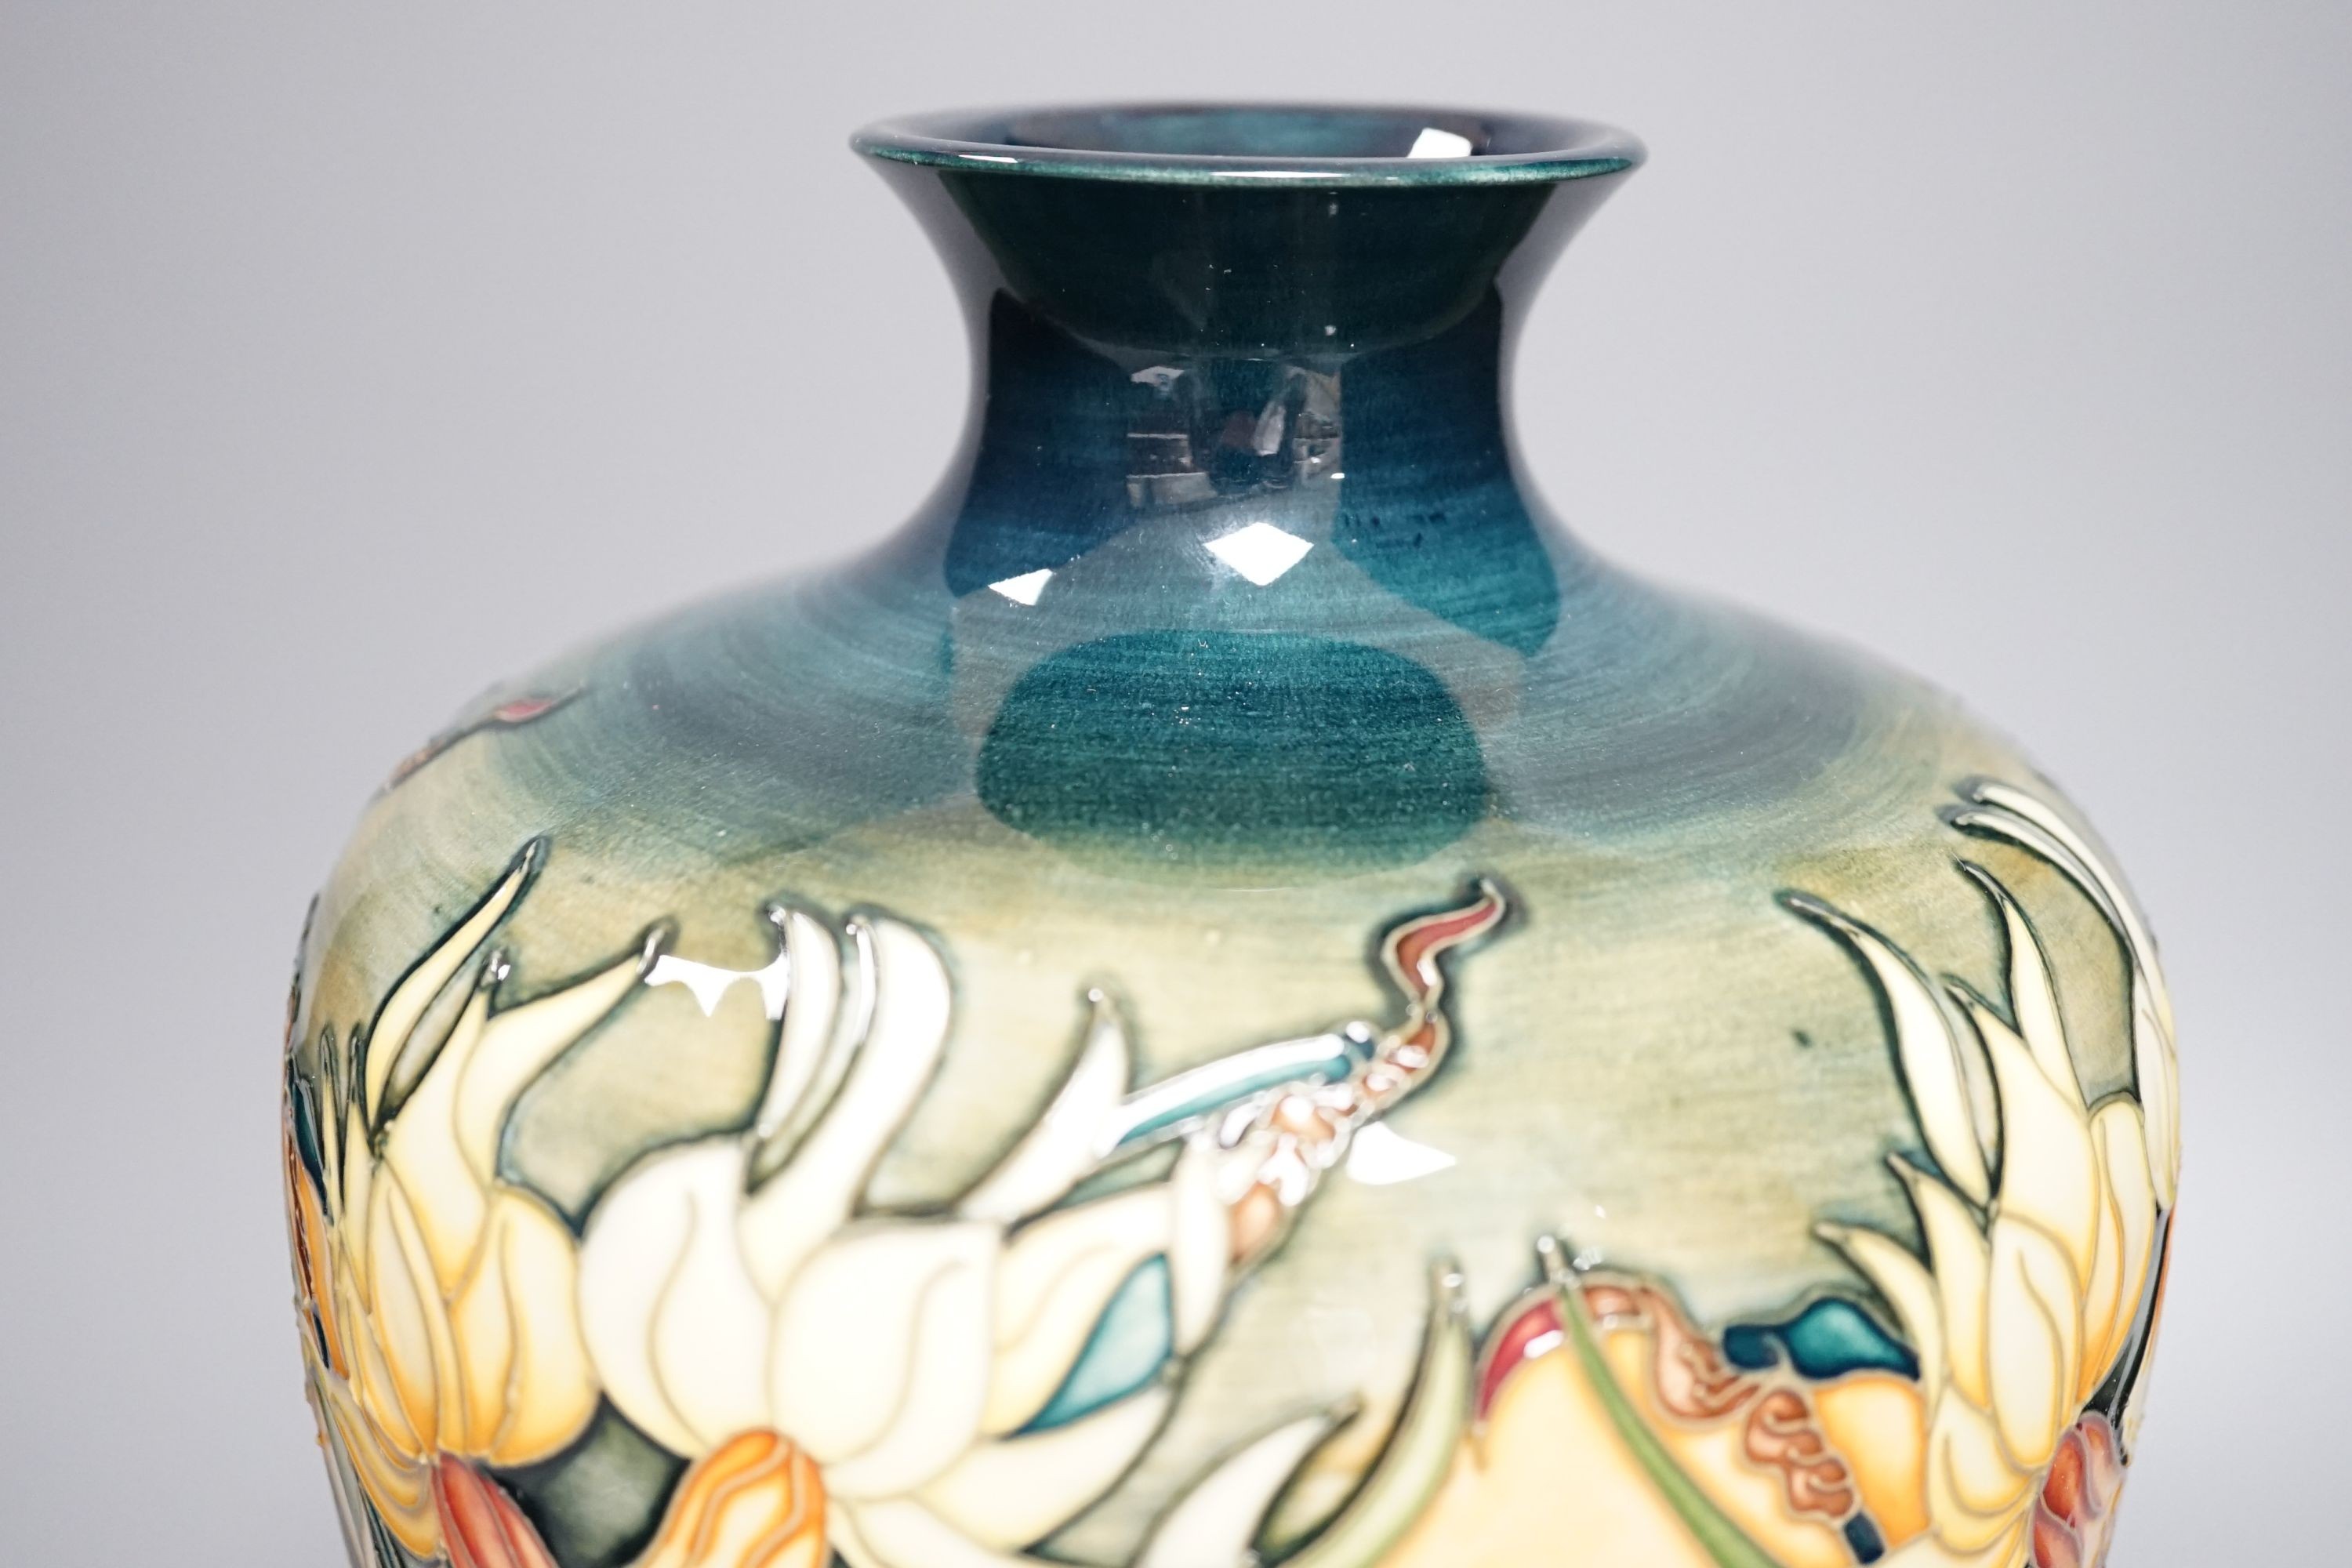 A Moorcroft Ode to Spring pattern ovoid vase, dated 2002, signed Rachel Bishop, limited-edition 113/150, in original box